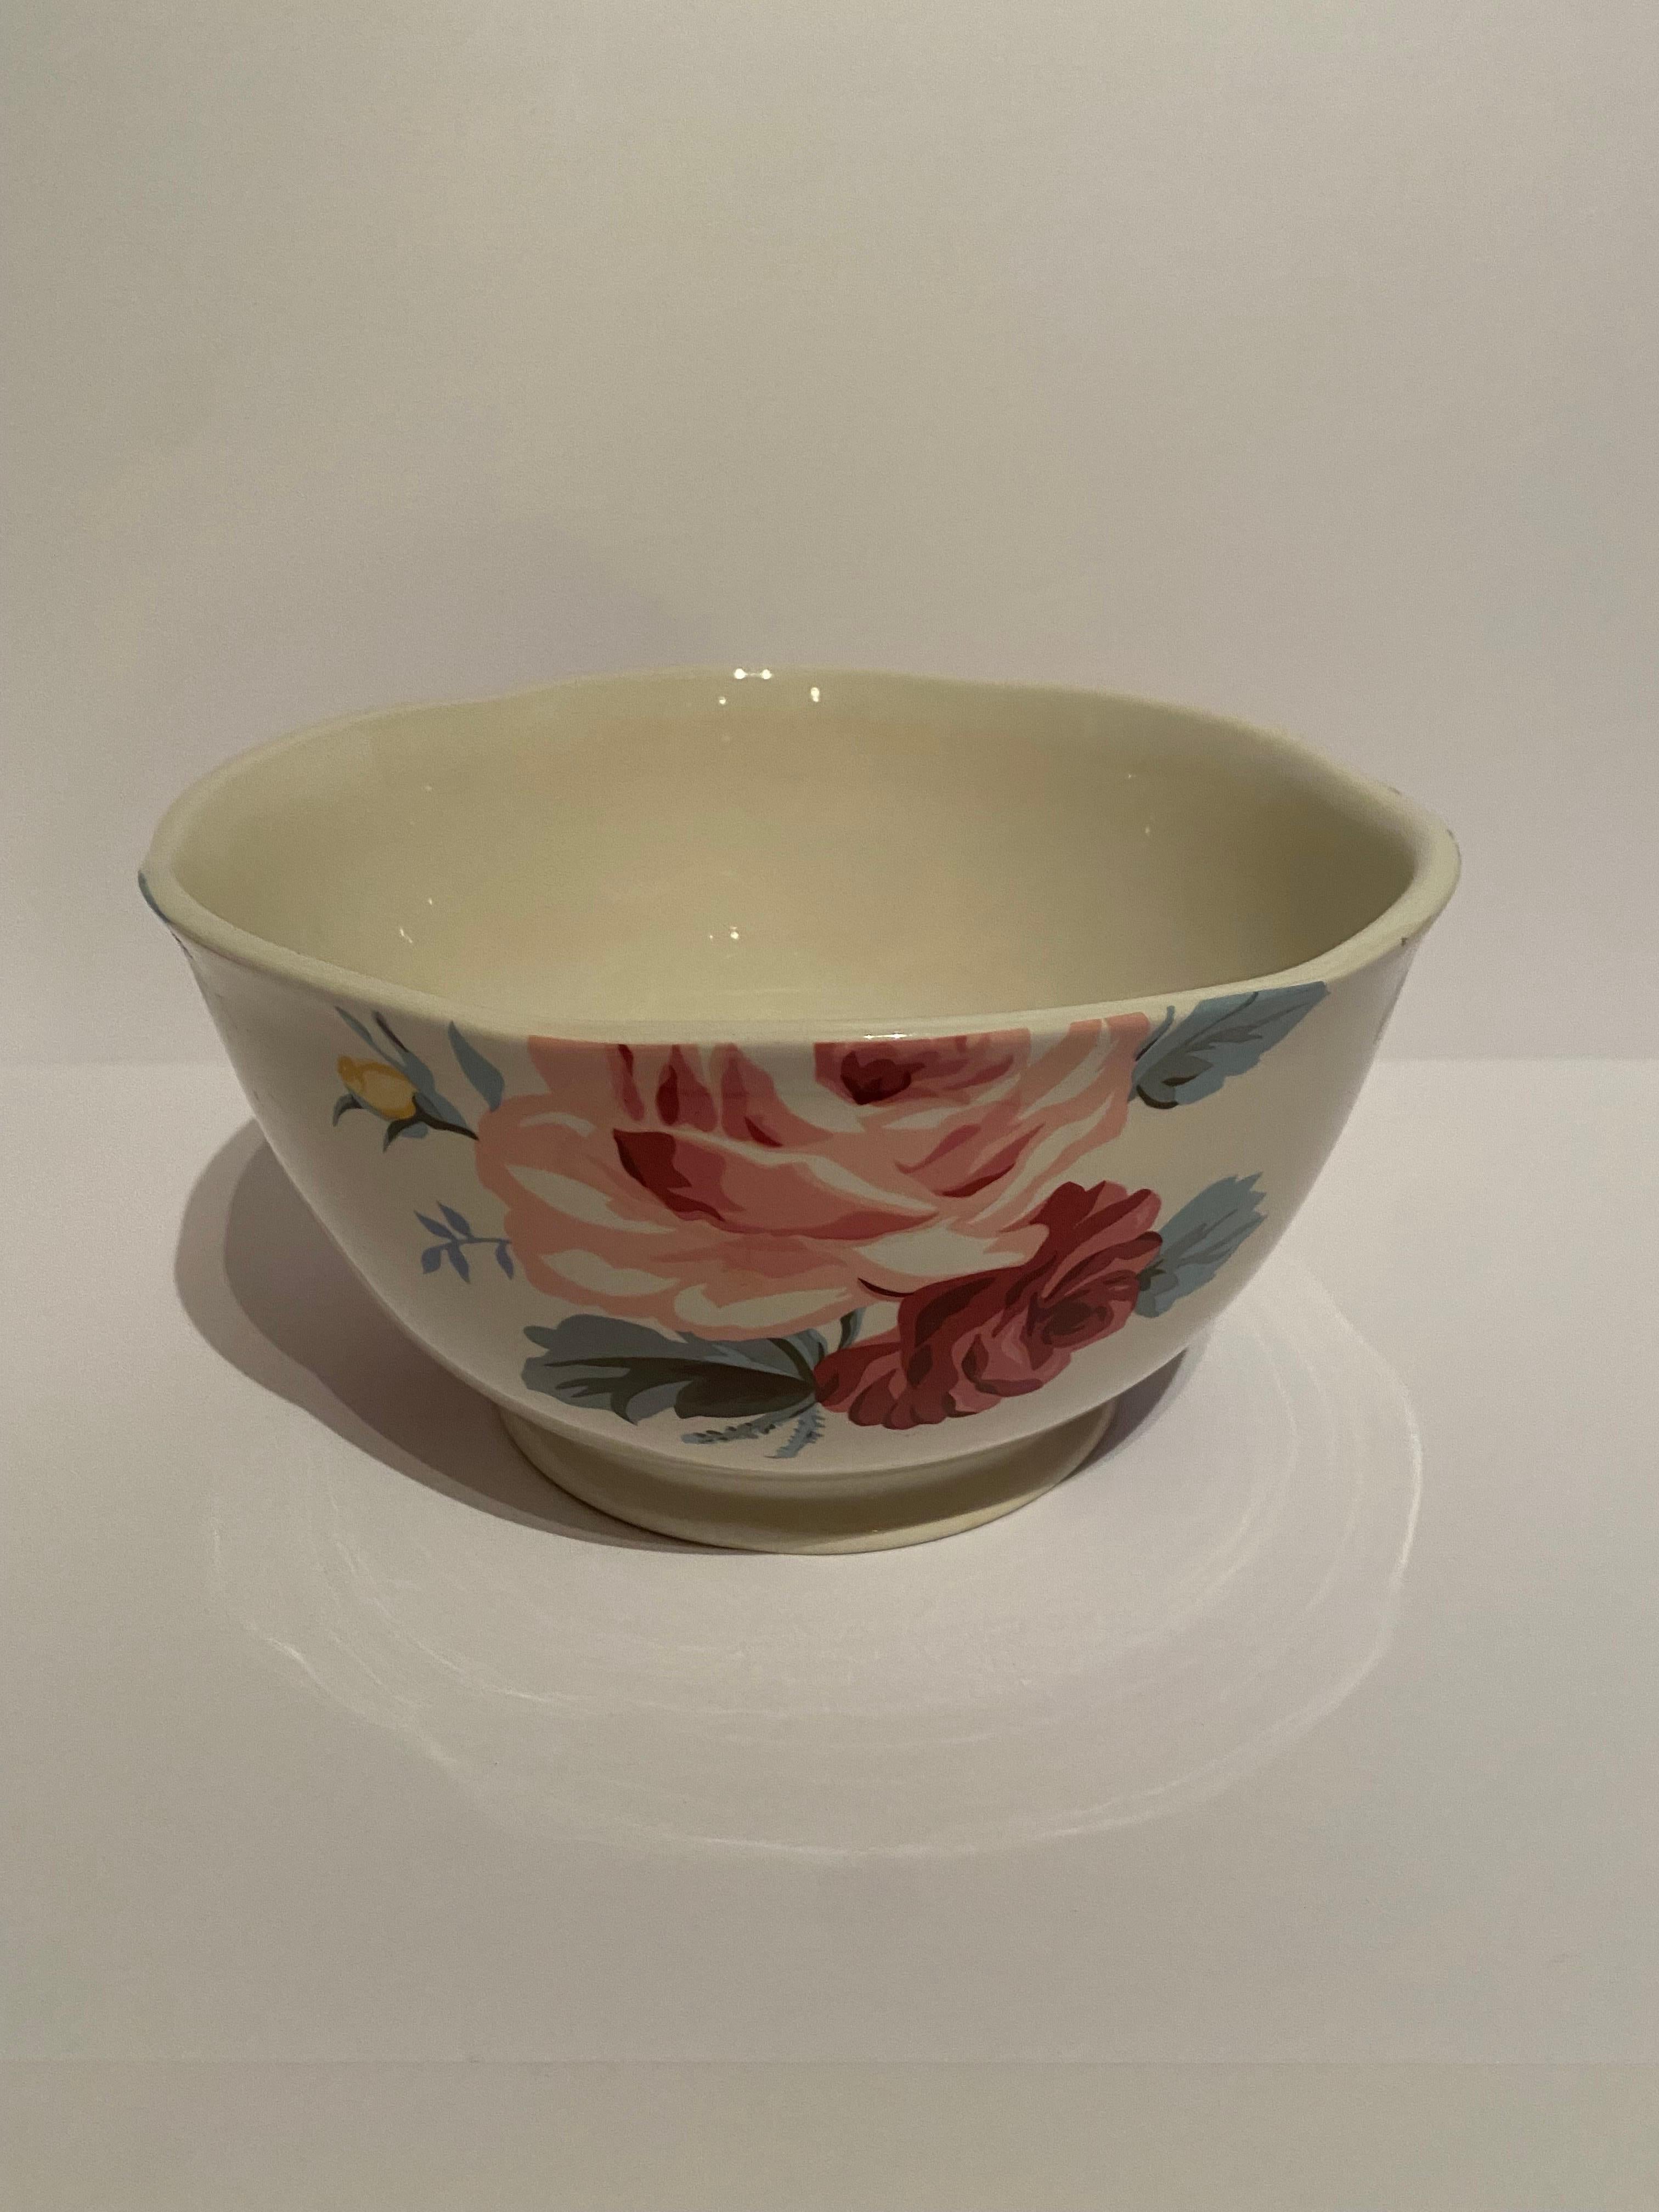 A footed centerpiece or serving bowl in the Kirsty pattern by Ralph Lauren Home.

Features a pastel floral pattern on white.

Crafted In Portugal. Discontinued pattern; made from 1999 to 2001.

Dimensions: 9” W x 7.5” H.